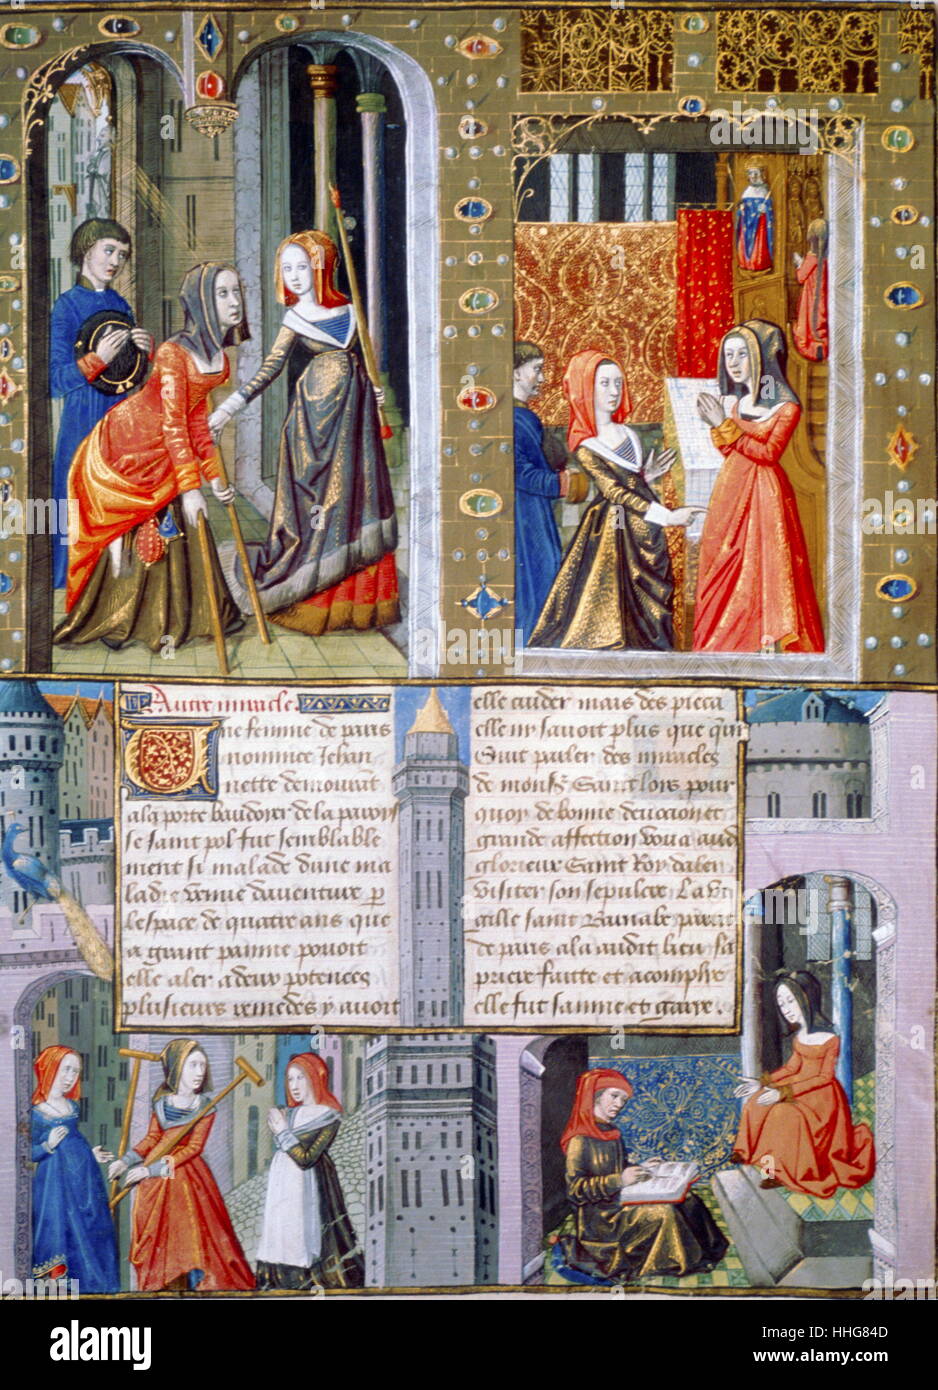 Scenes of daily life in France in the middle ages, 15th century; Illustration from Le livre des faiz Monseigneur Saint Louis, in the collection of the Bibliotheque Nationale, Paris Stock Photo